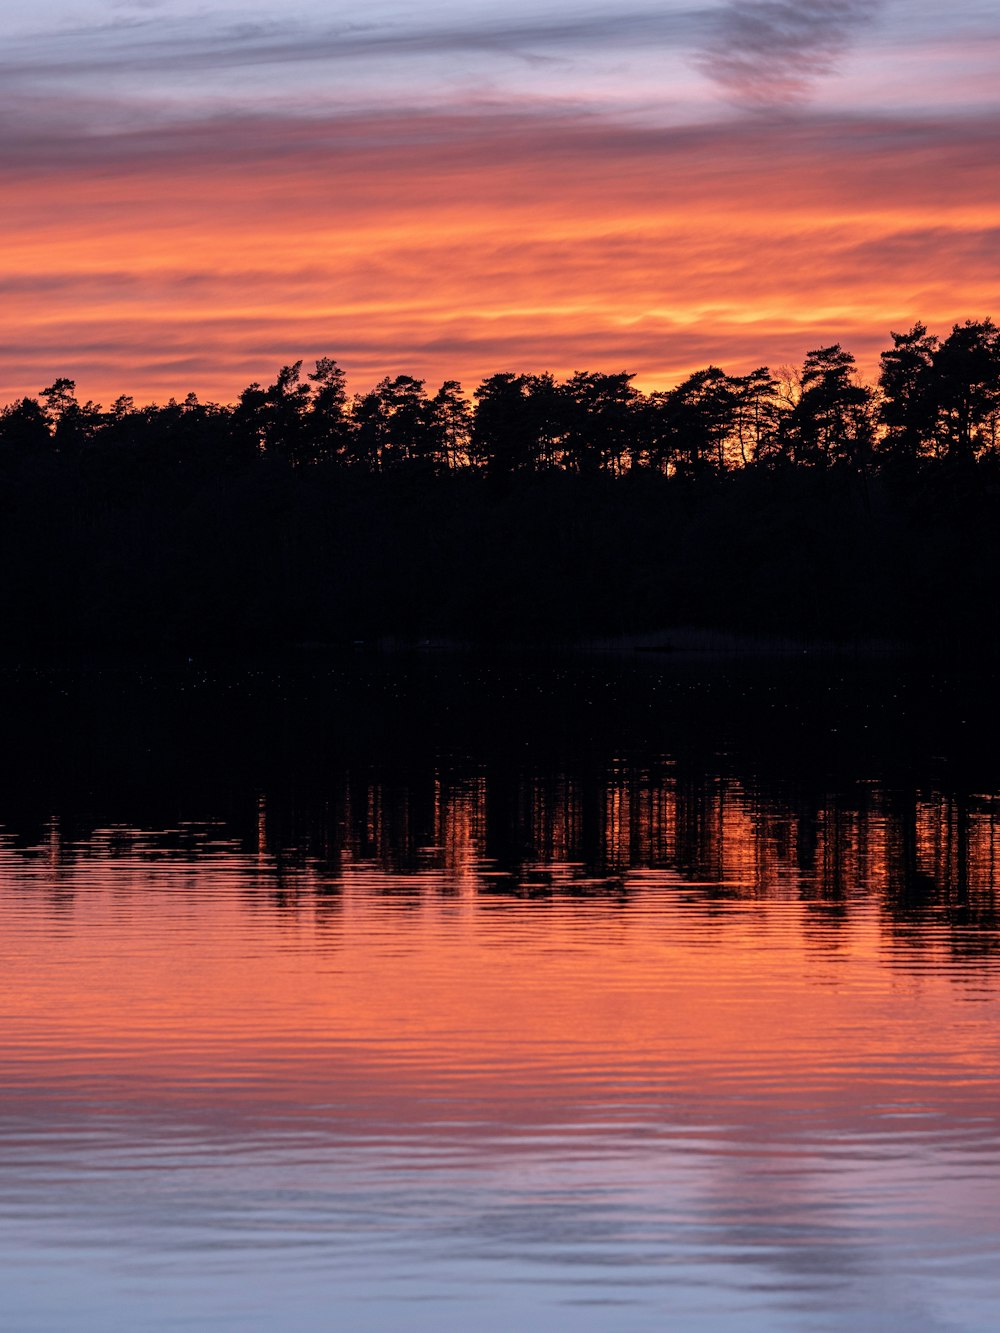 a sunset over a lake with trees in the background